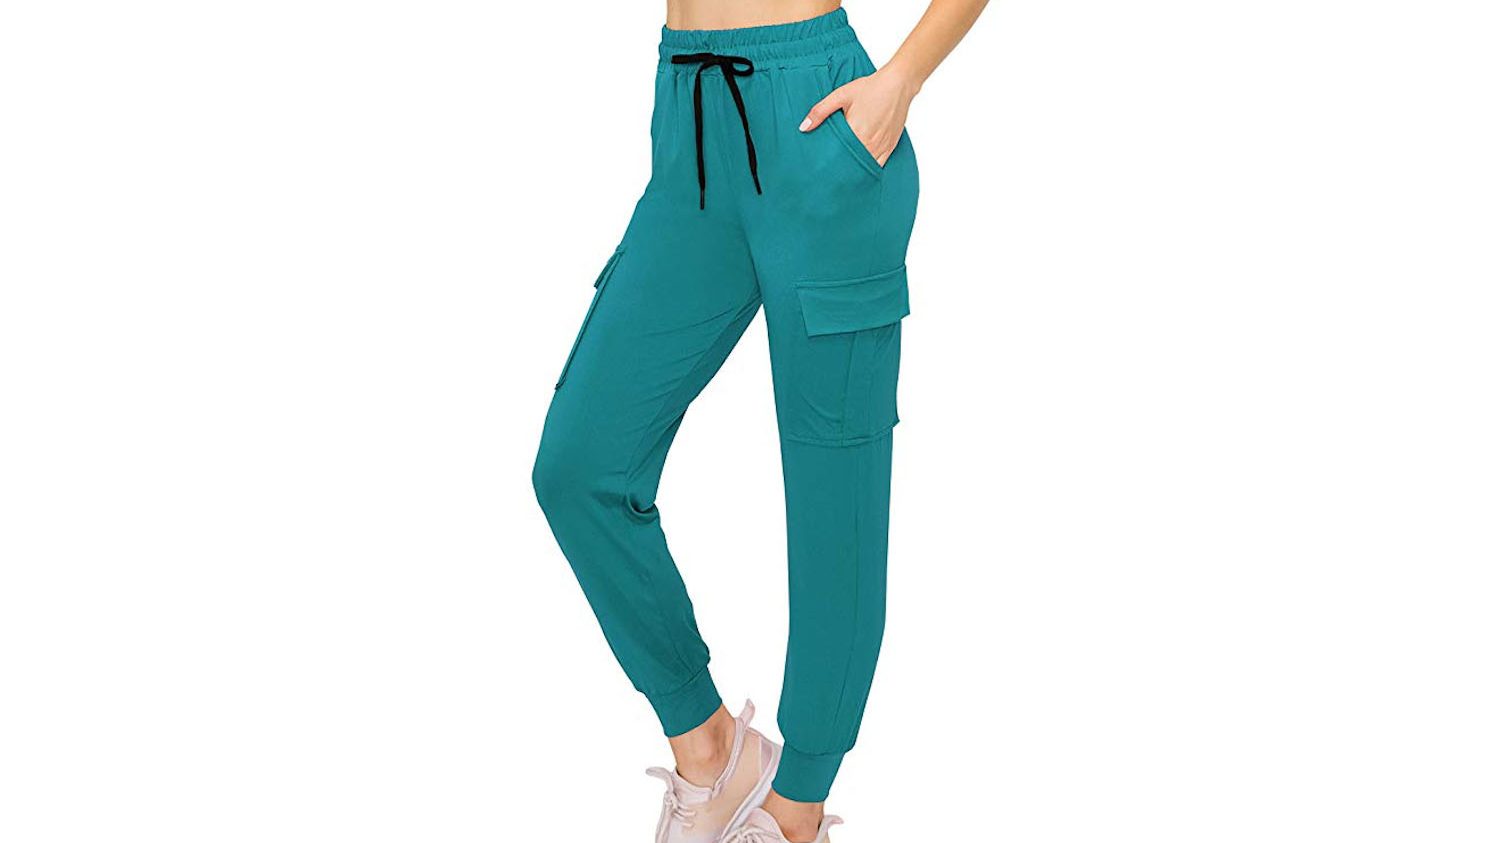 The Best Sweatpants for Women Over 50: Shop Our Roundup